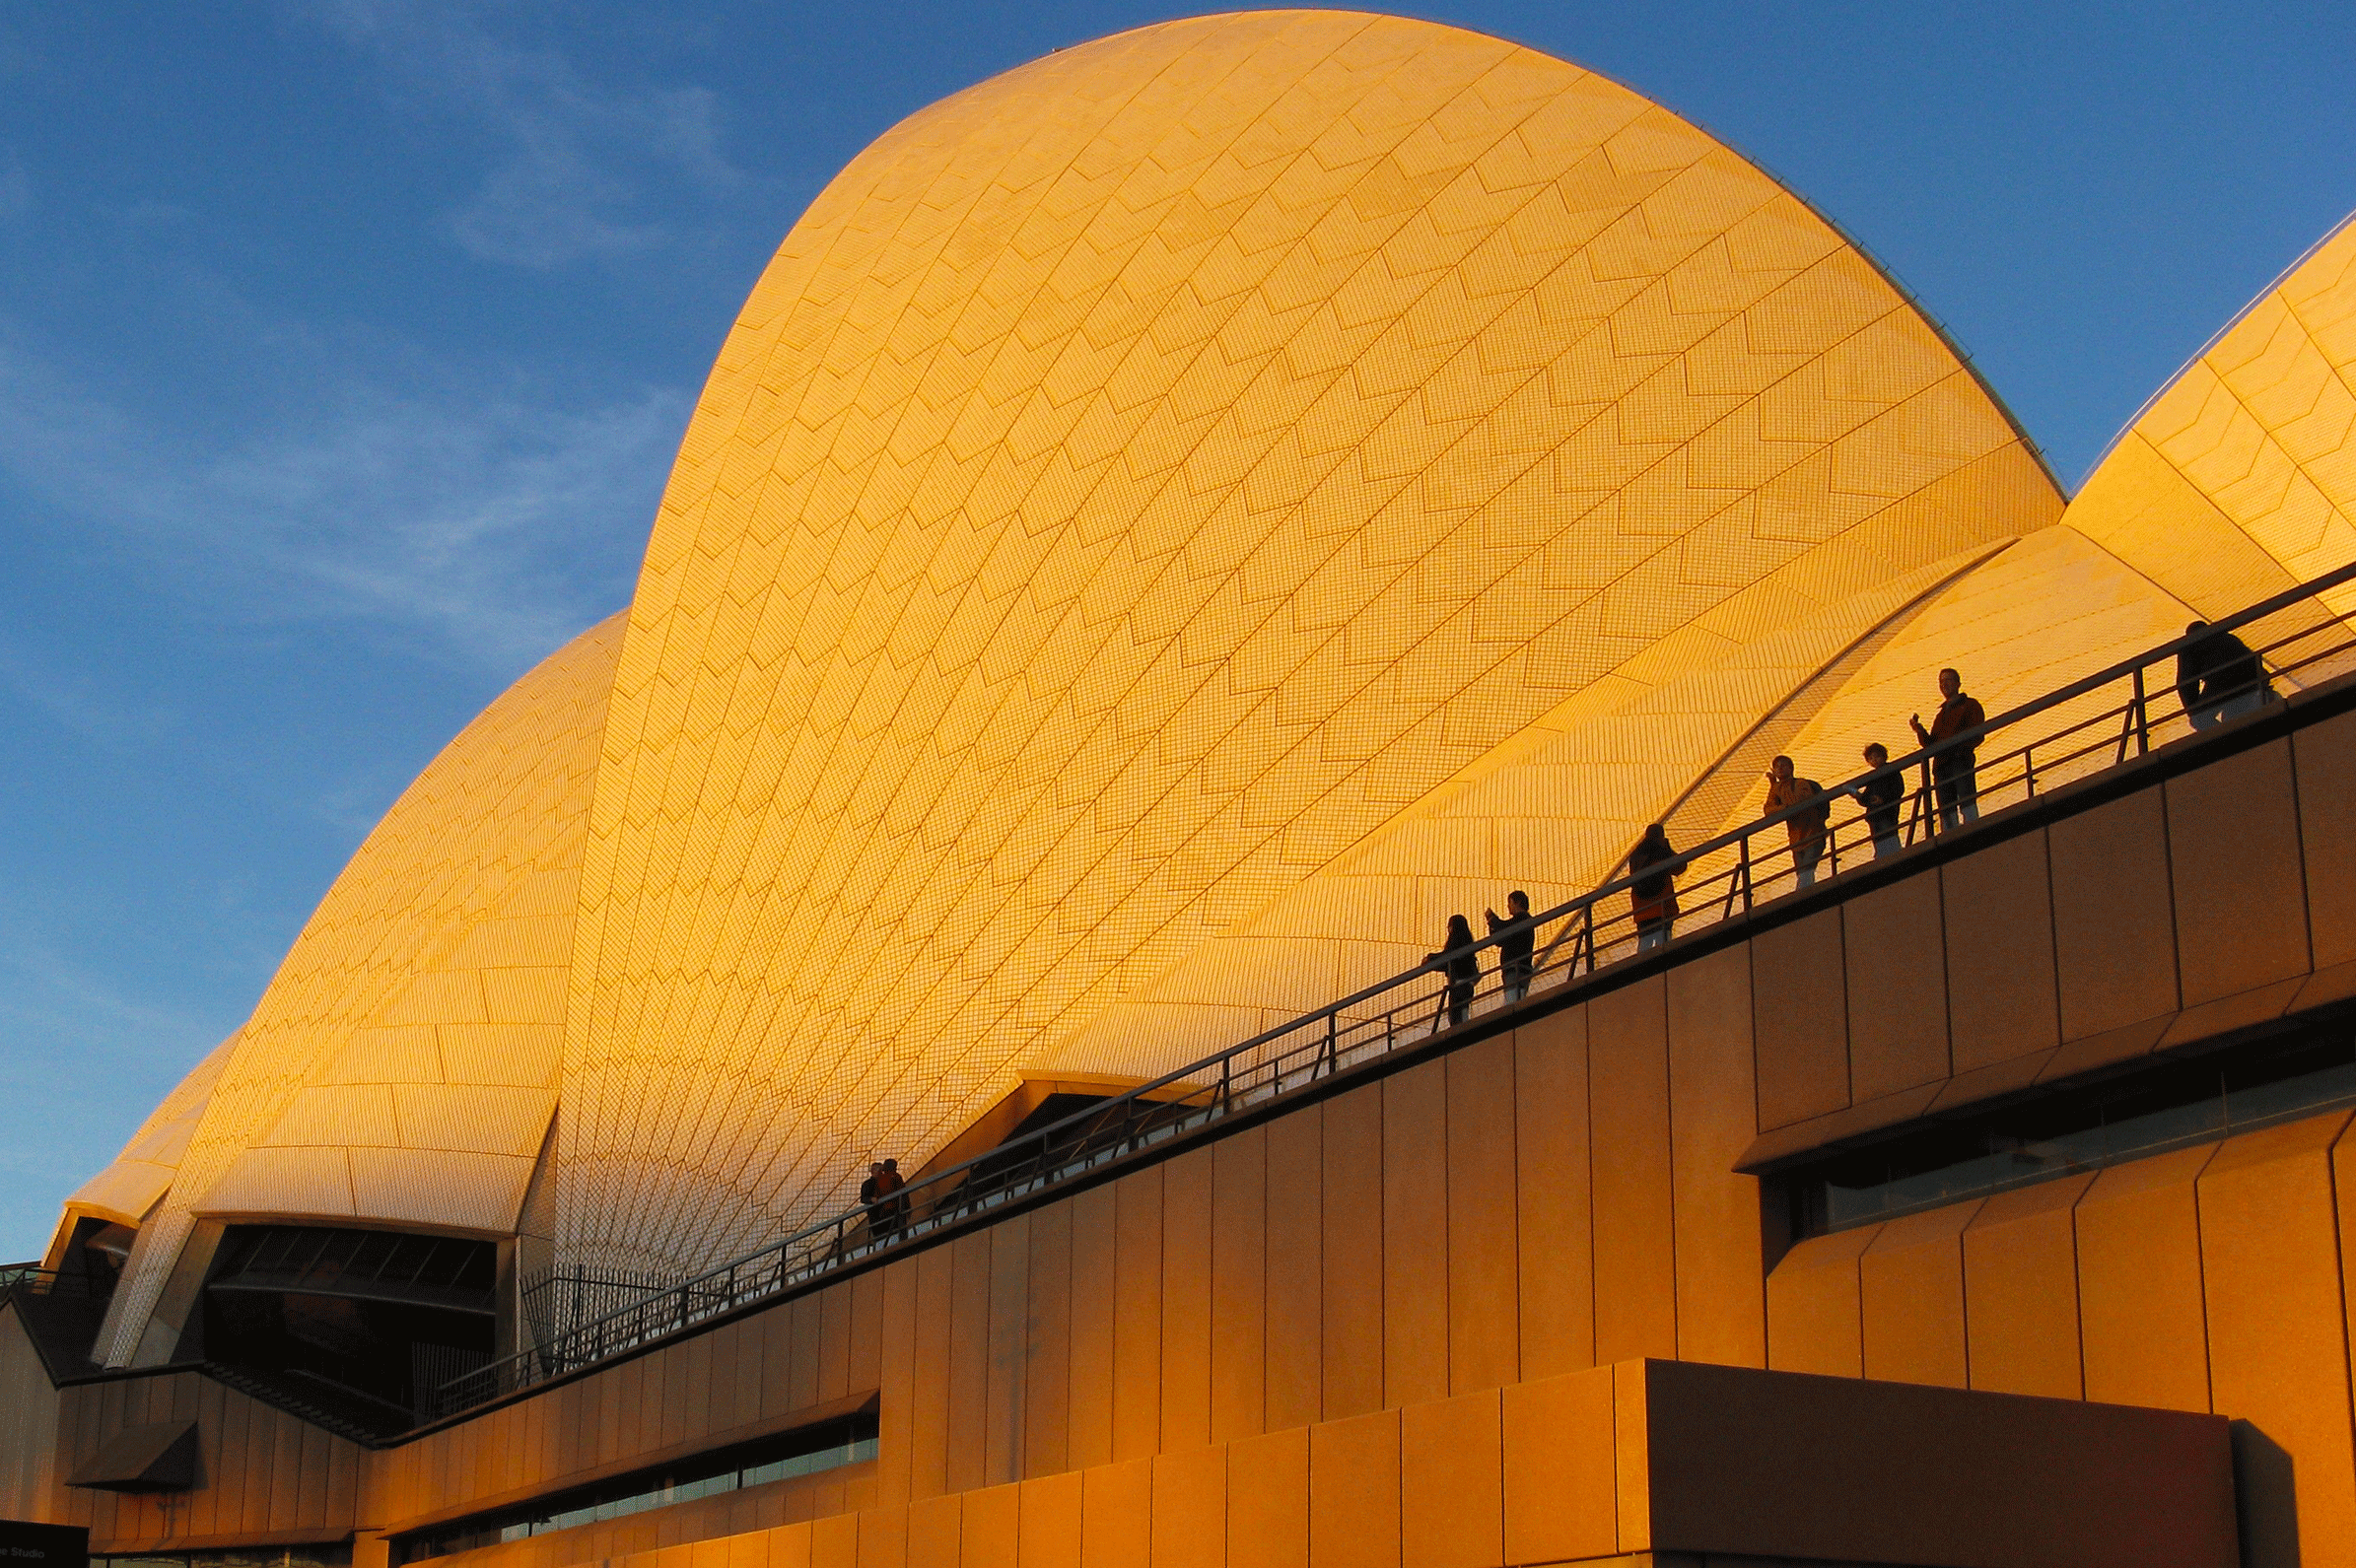 External photograph of Sydney Opera House showing white 'sails' against sky.